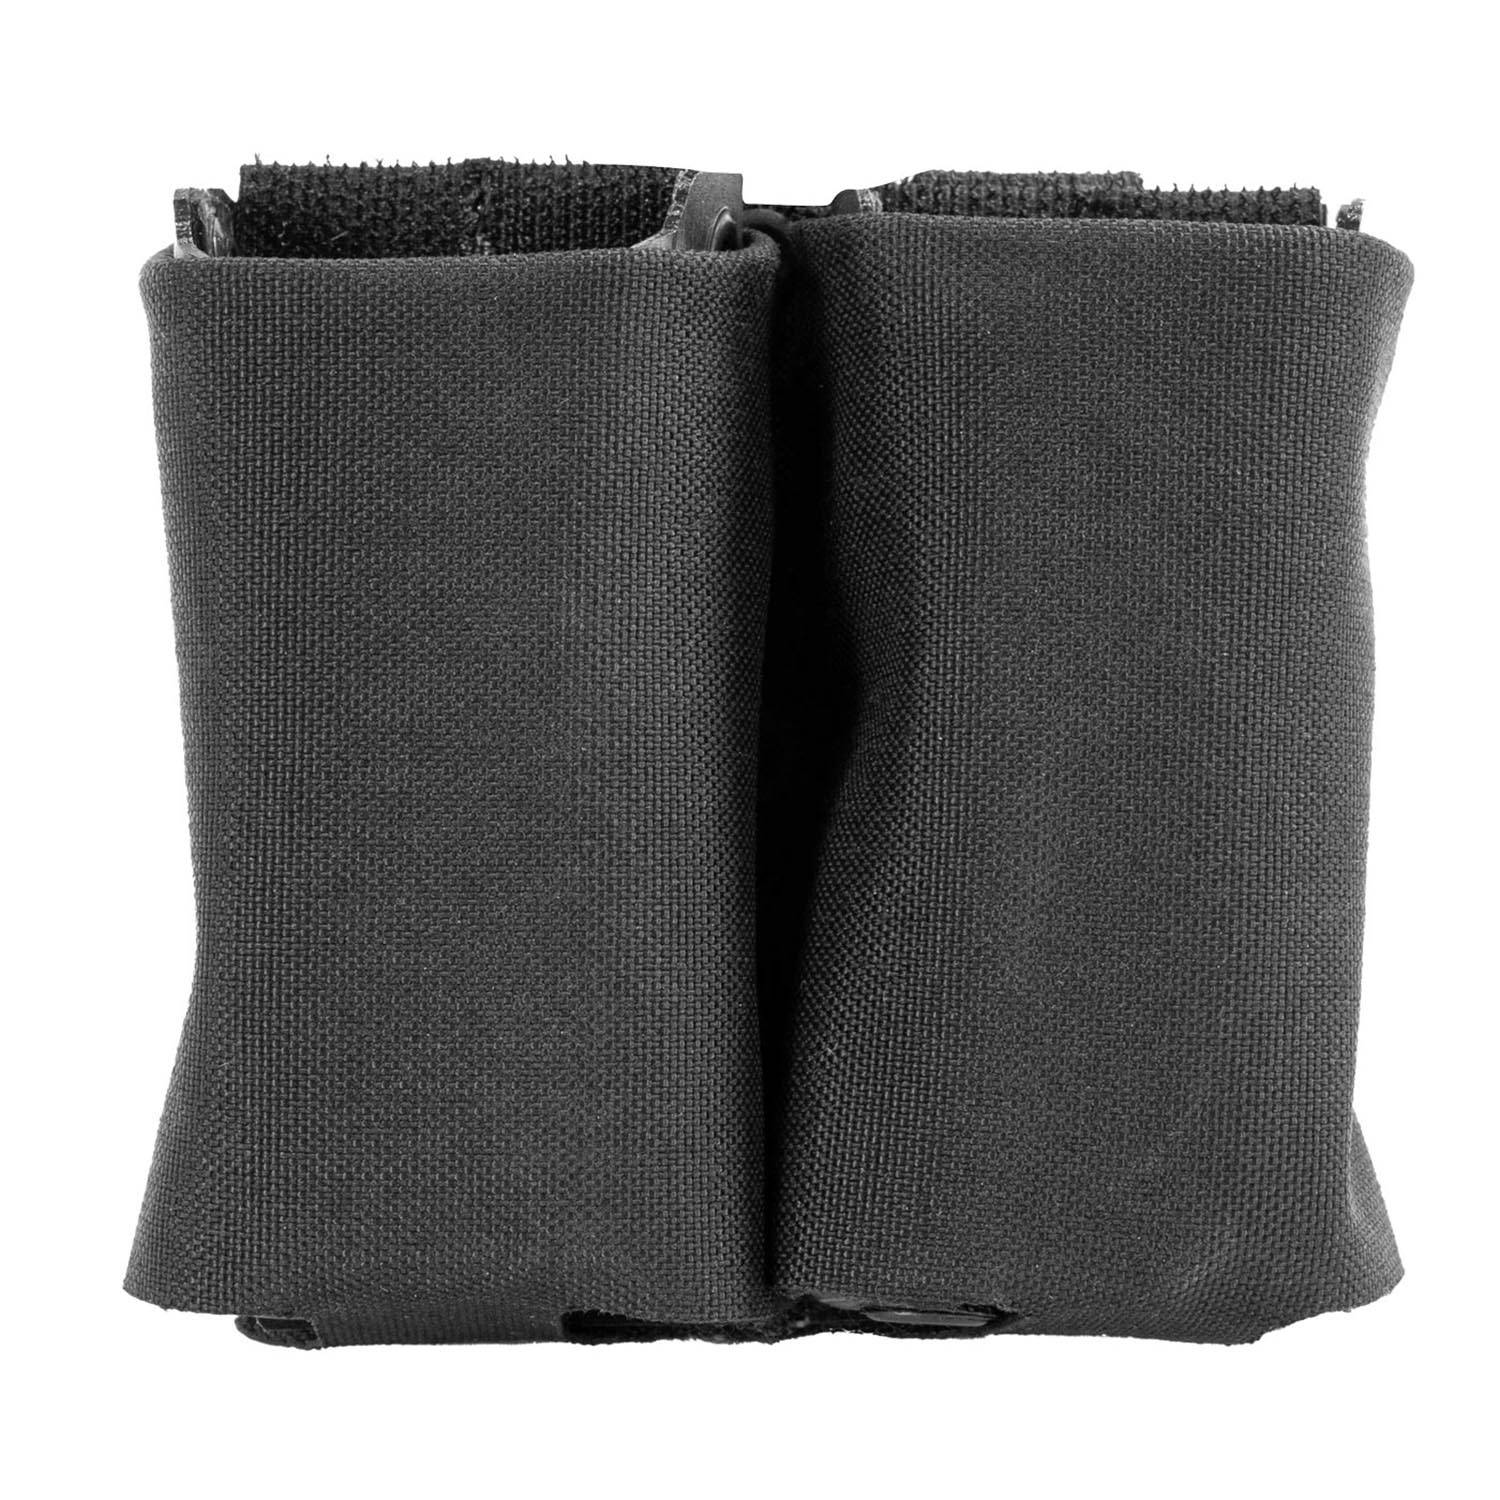 POINT BLANK DOUBLE PISTOL MAG POUCH